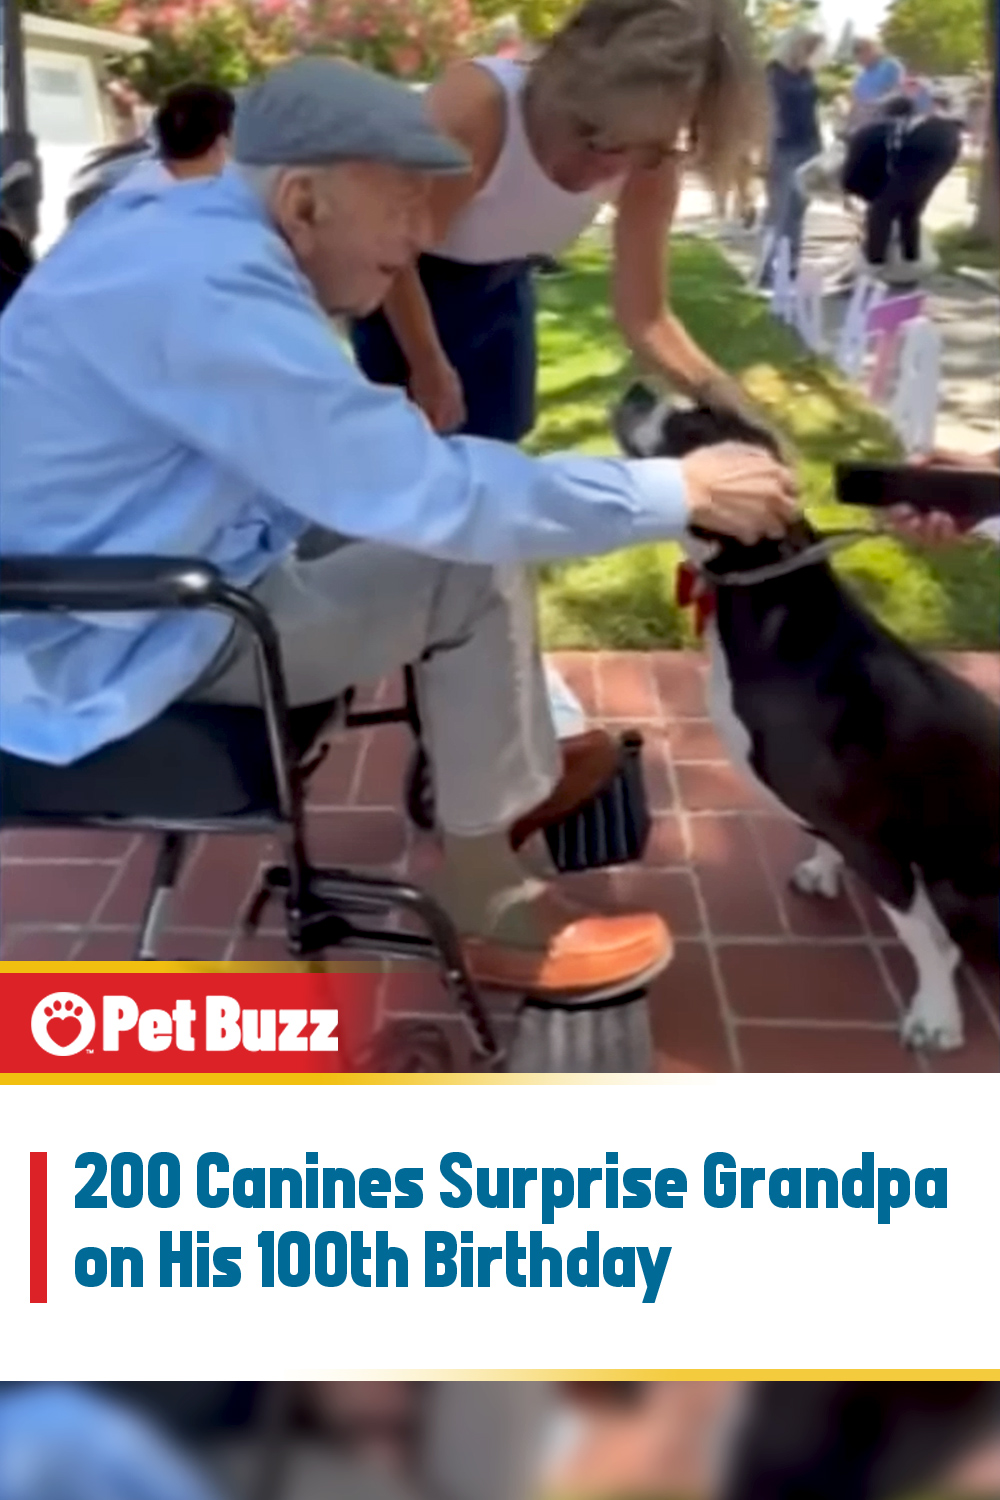 200 Canines Surprise Grandpa on His 100th Birthday